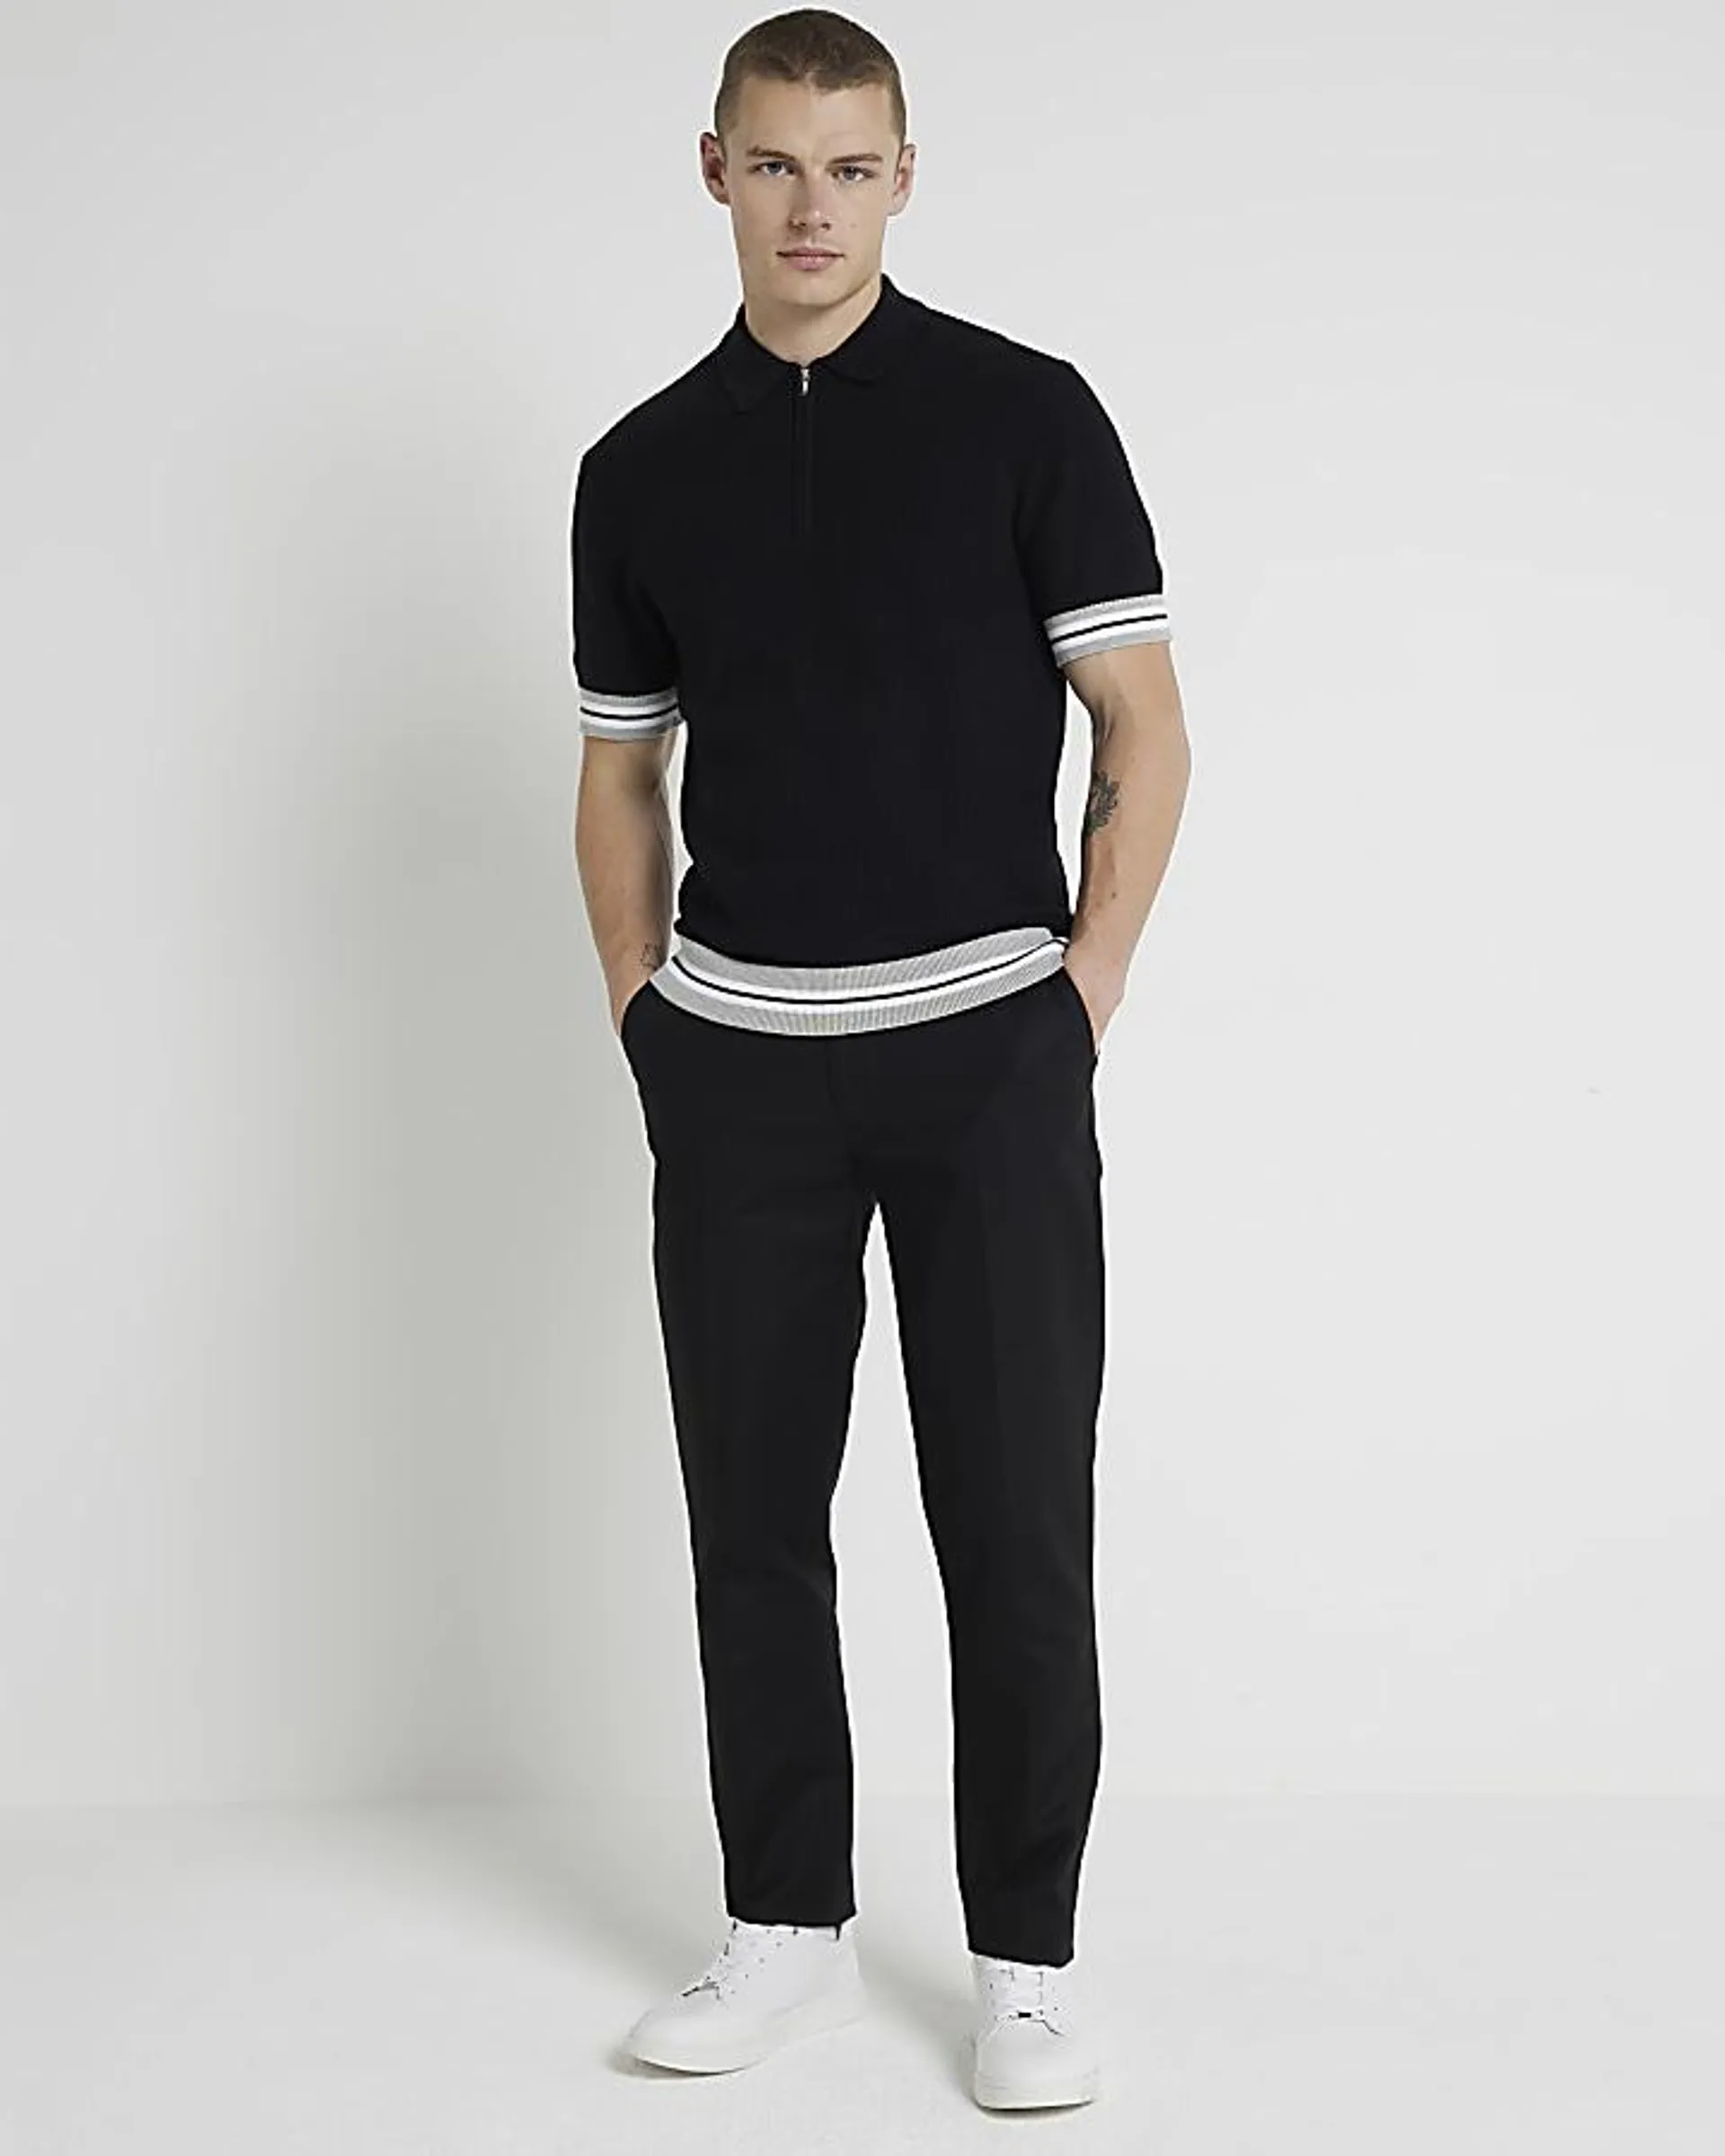 Black slim fit knitted polo shirt